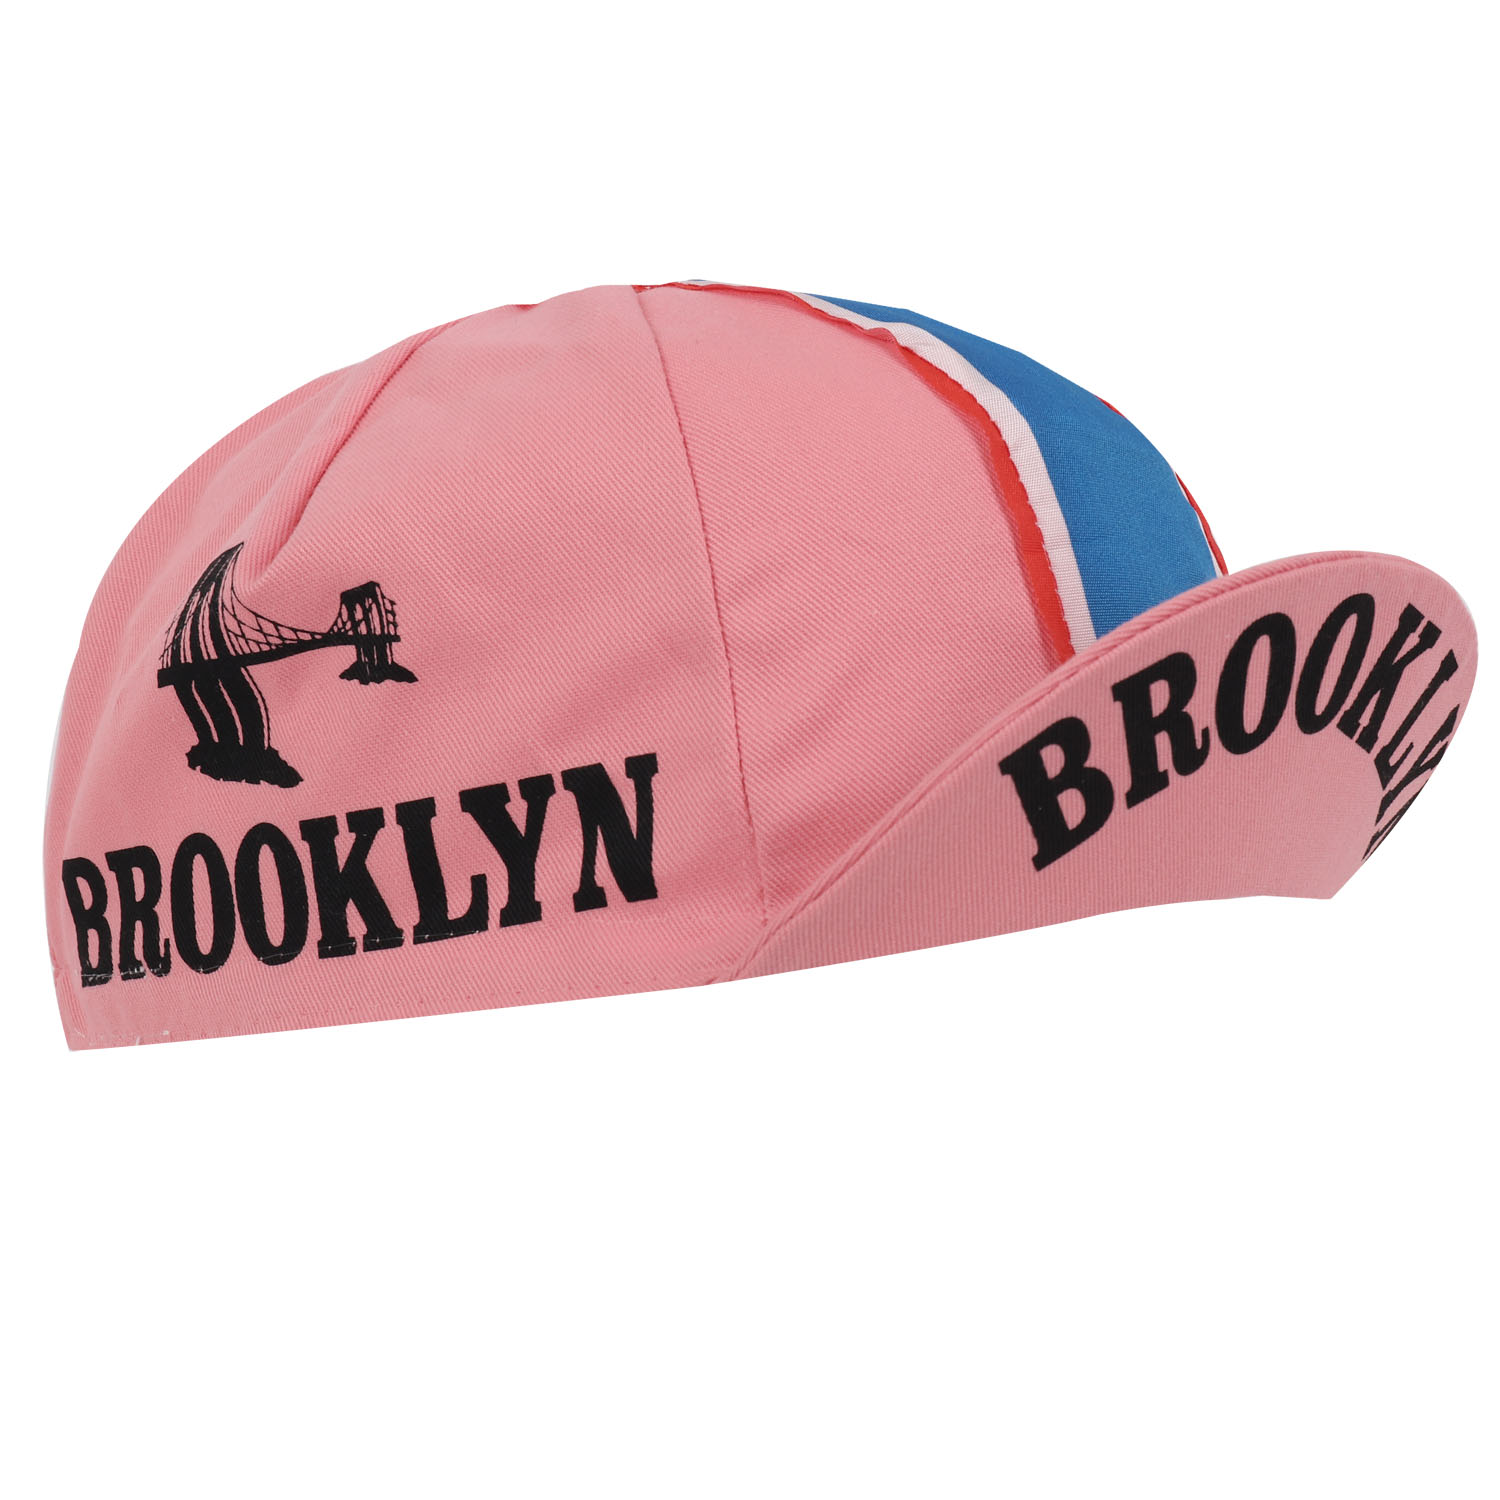 Picture of Apis Retro Style Team Cycling Cap - BROOKLYN ROSA